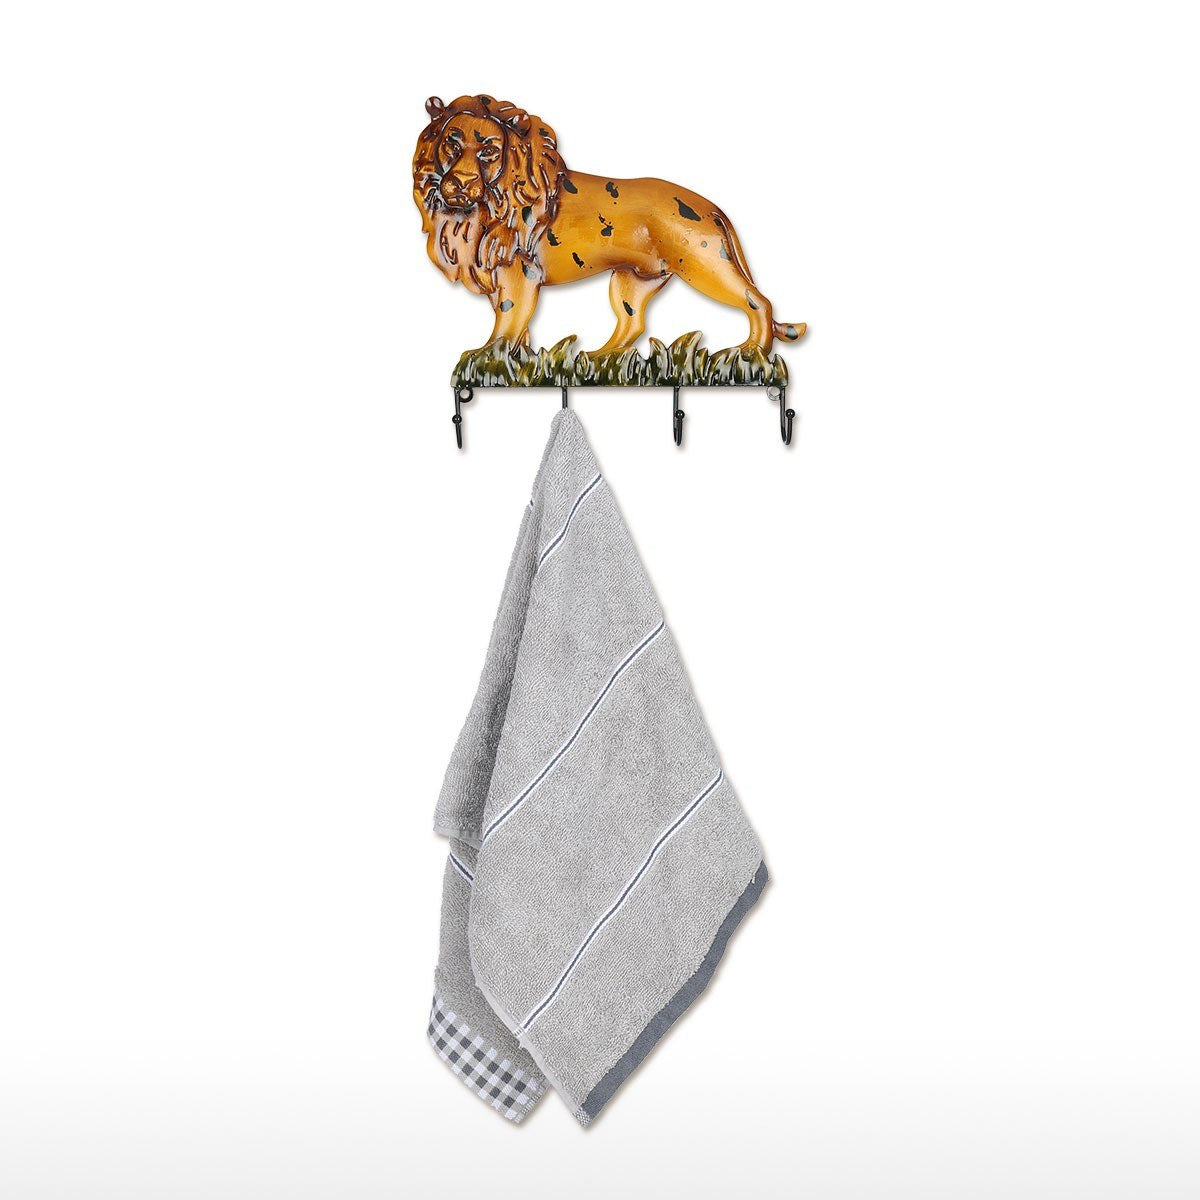 Get the power of a whole pride of lions with this lion wall hook